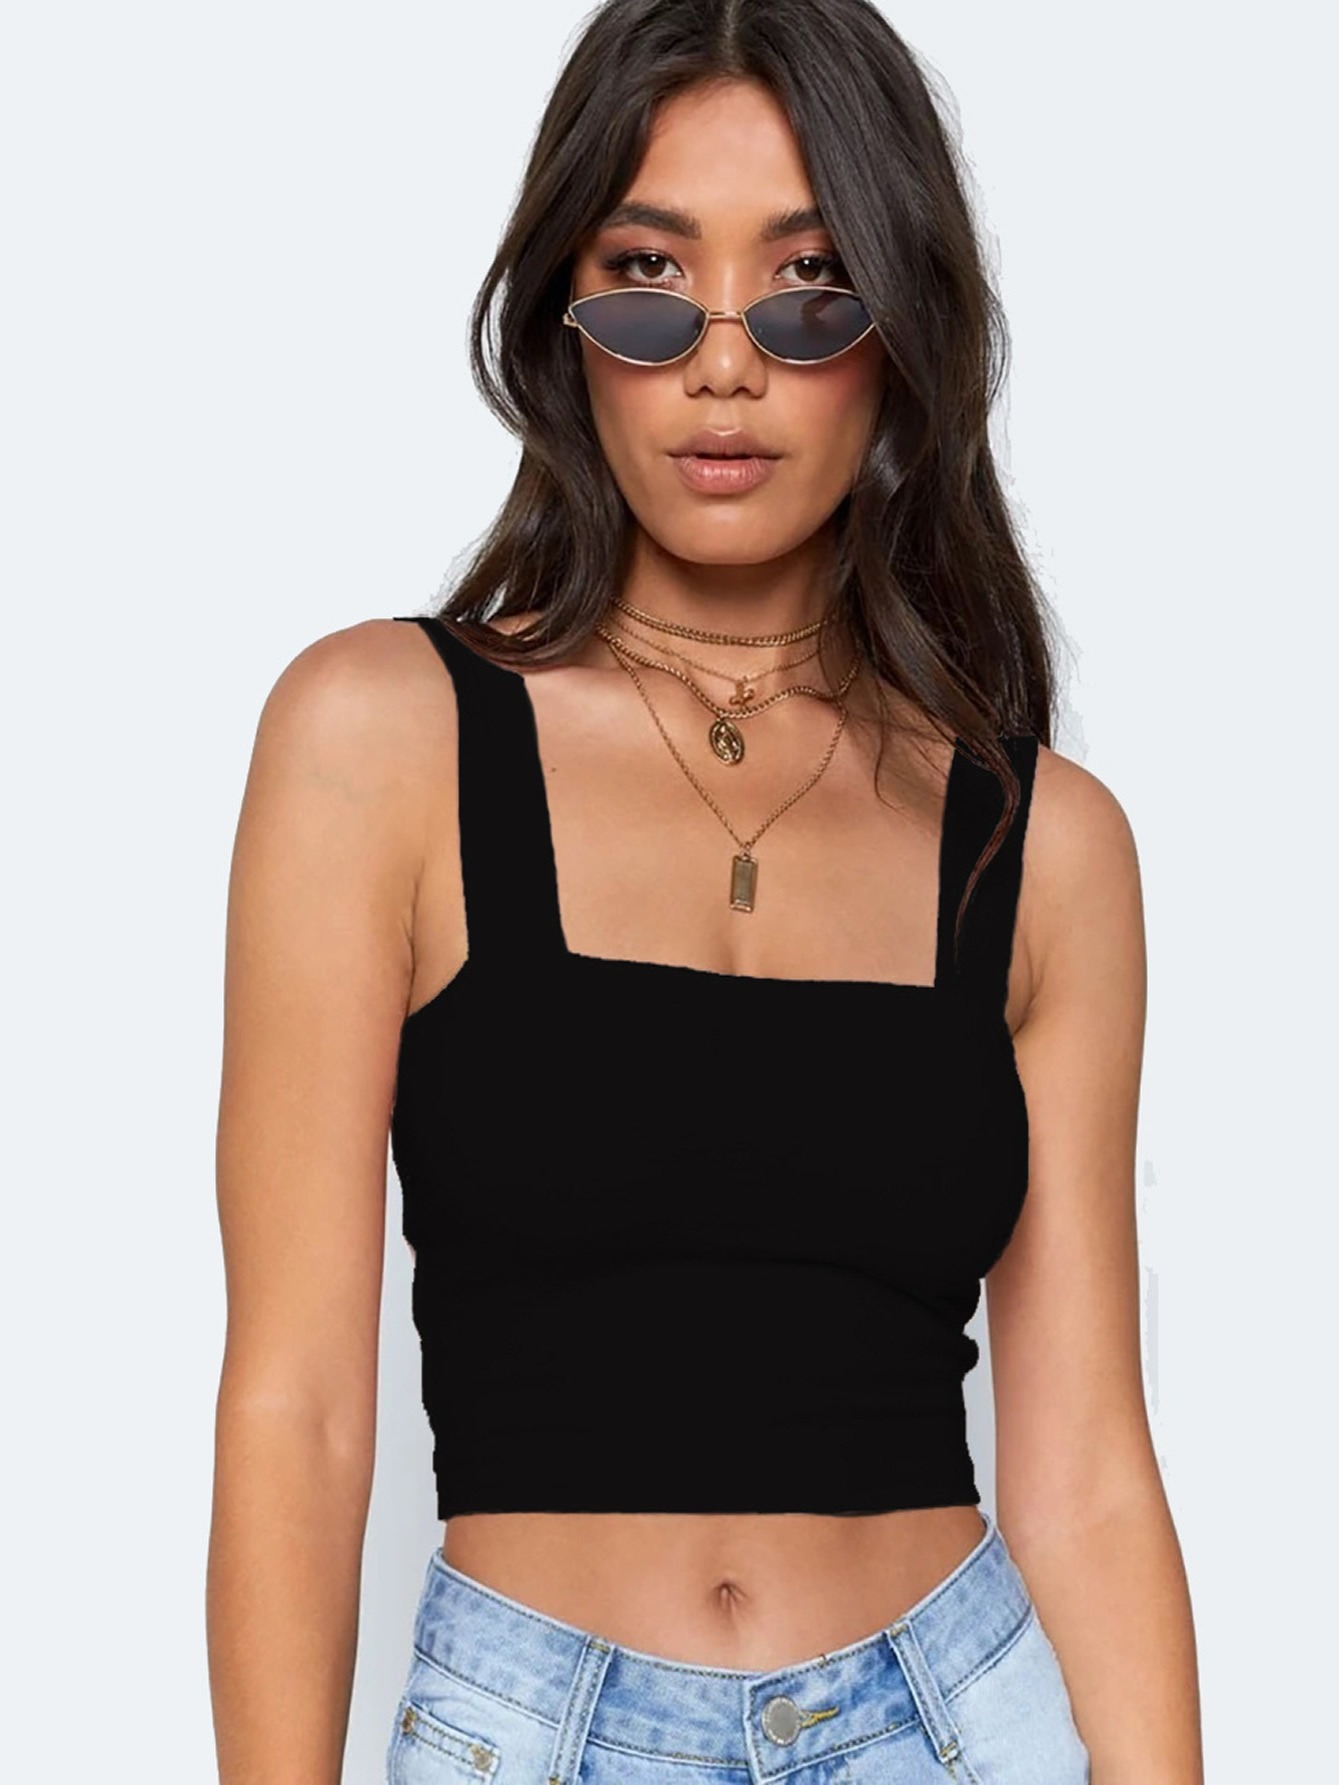 Women Y2K Sexy Camisole Tops Sleeveless Square Neck Cami Tops